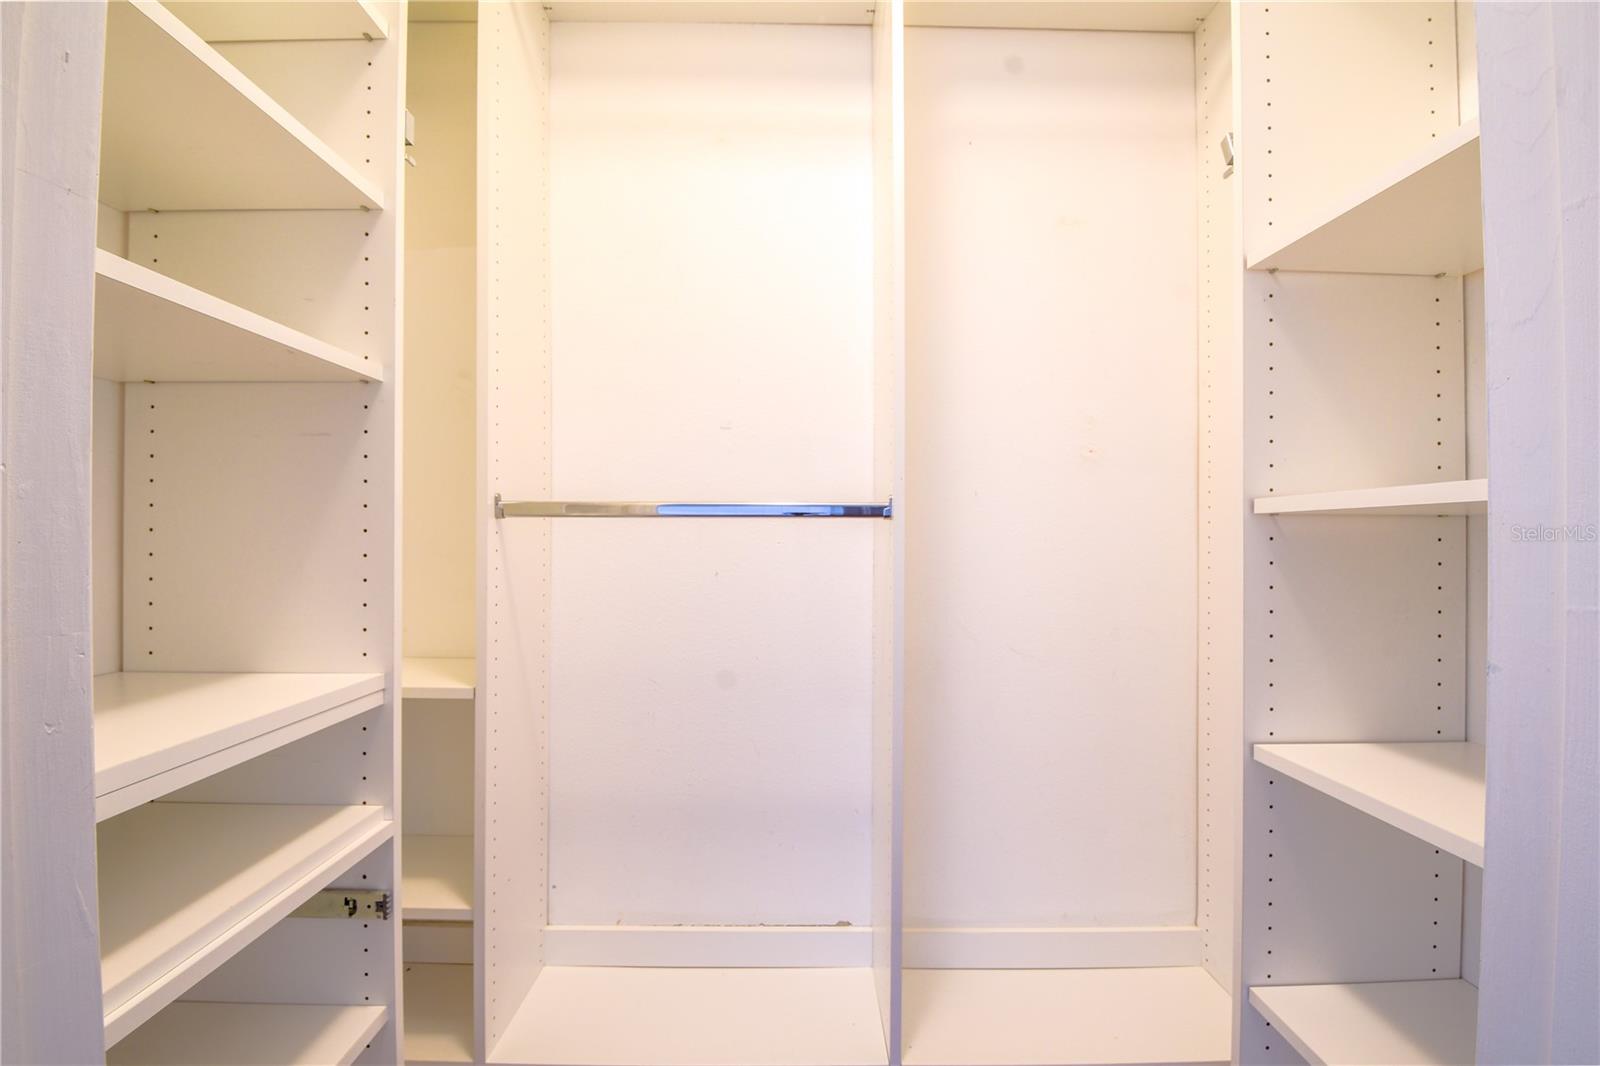 The primary bedroom has a large walk-in closet.